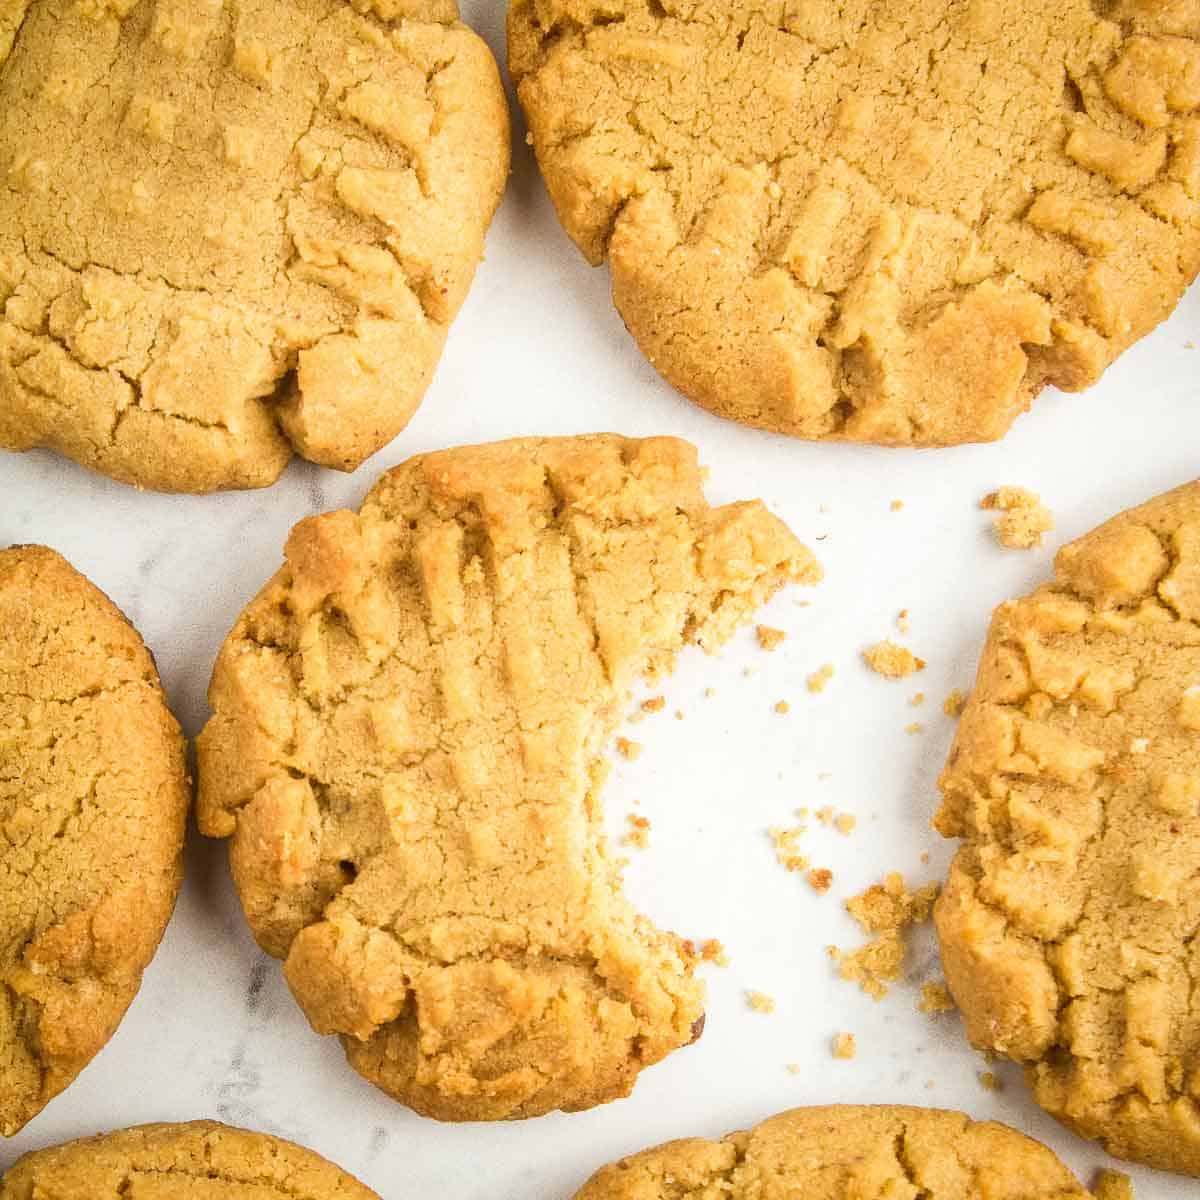 Overhead close up shot of multiple peanut butter cookies, one with a bite taken out, on a white marble surface.